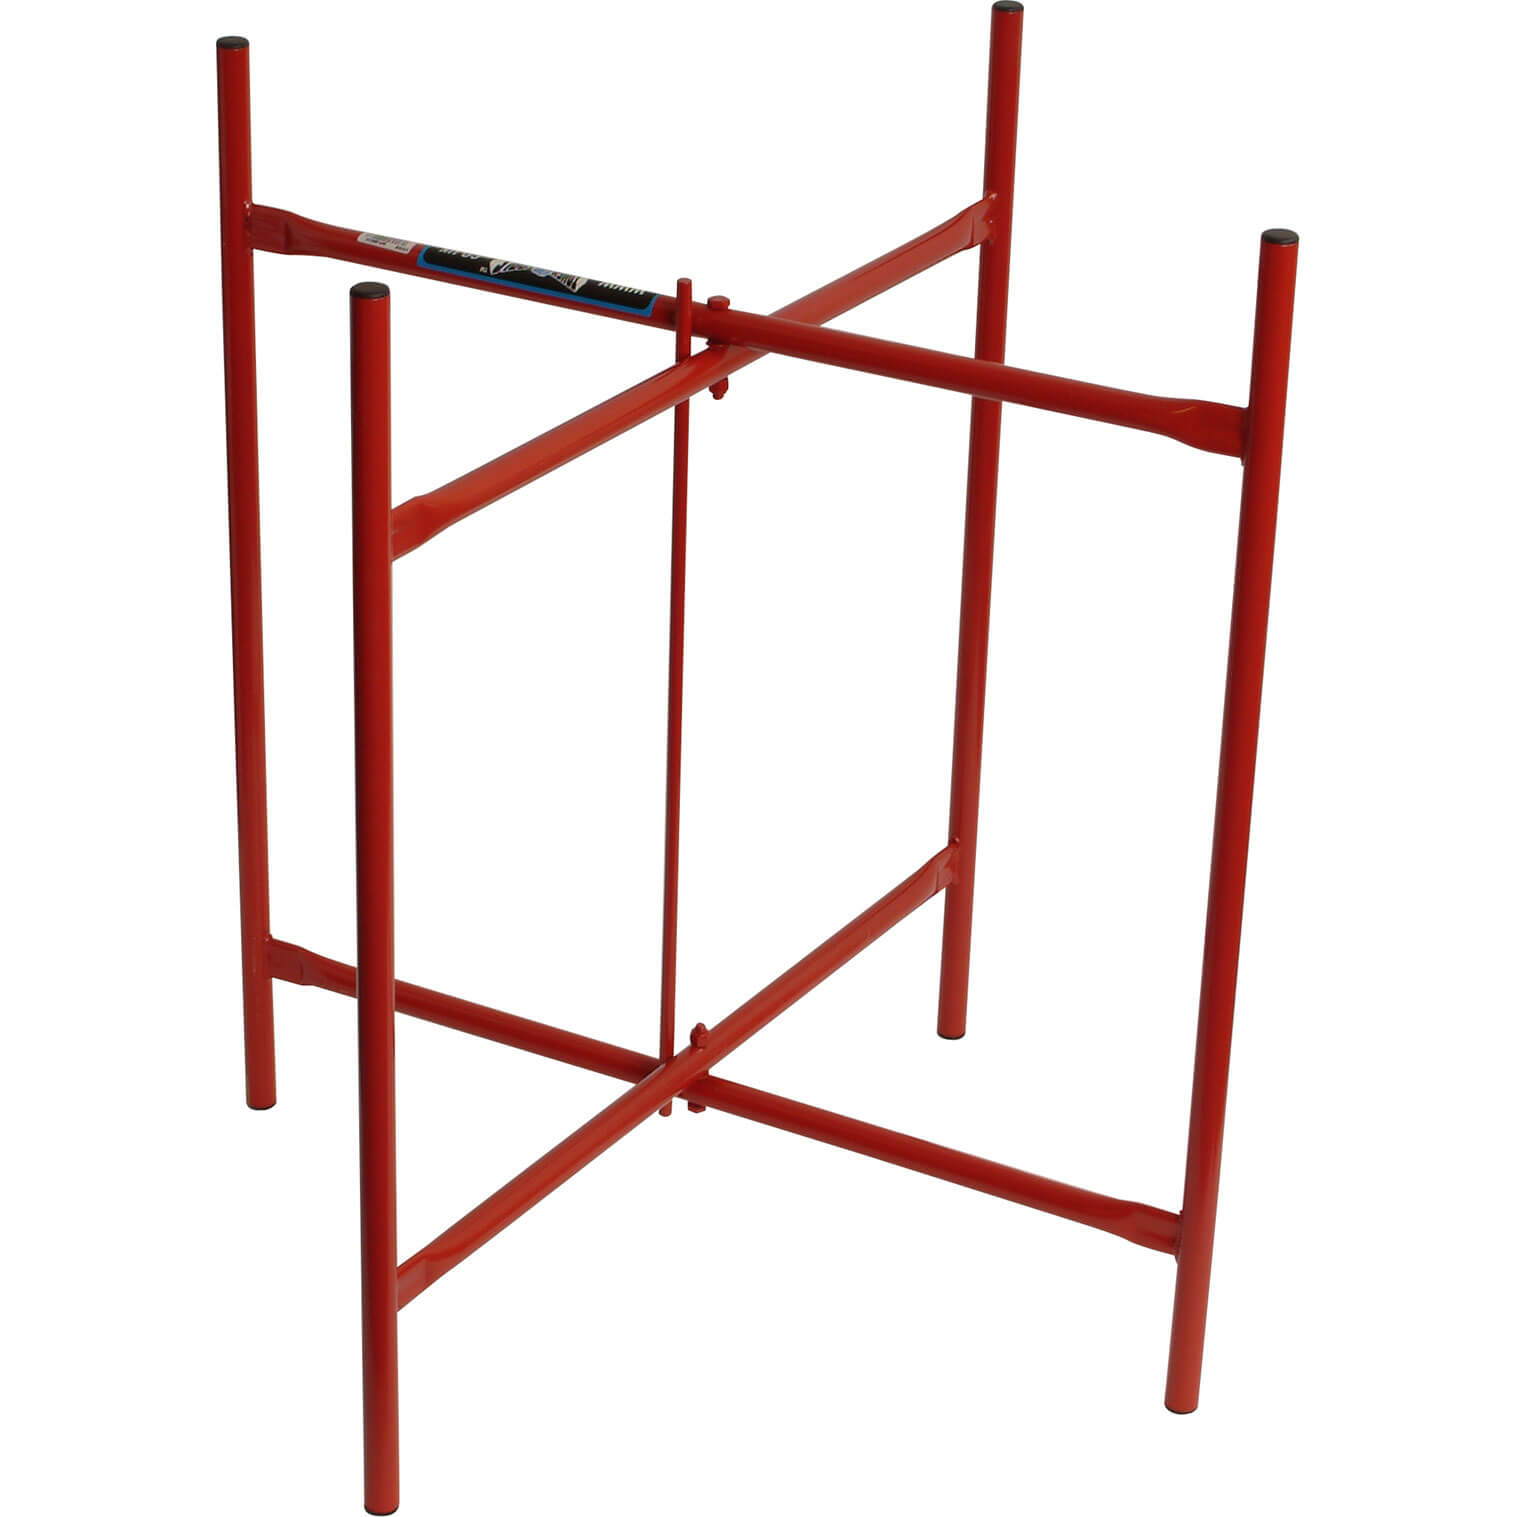 Mortar Stand 30" / 750mm Square for Plasterers Bricklayers & Renderers